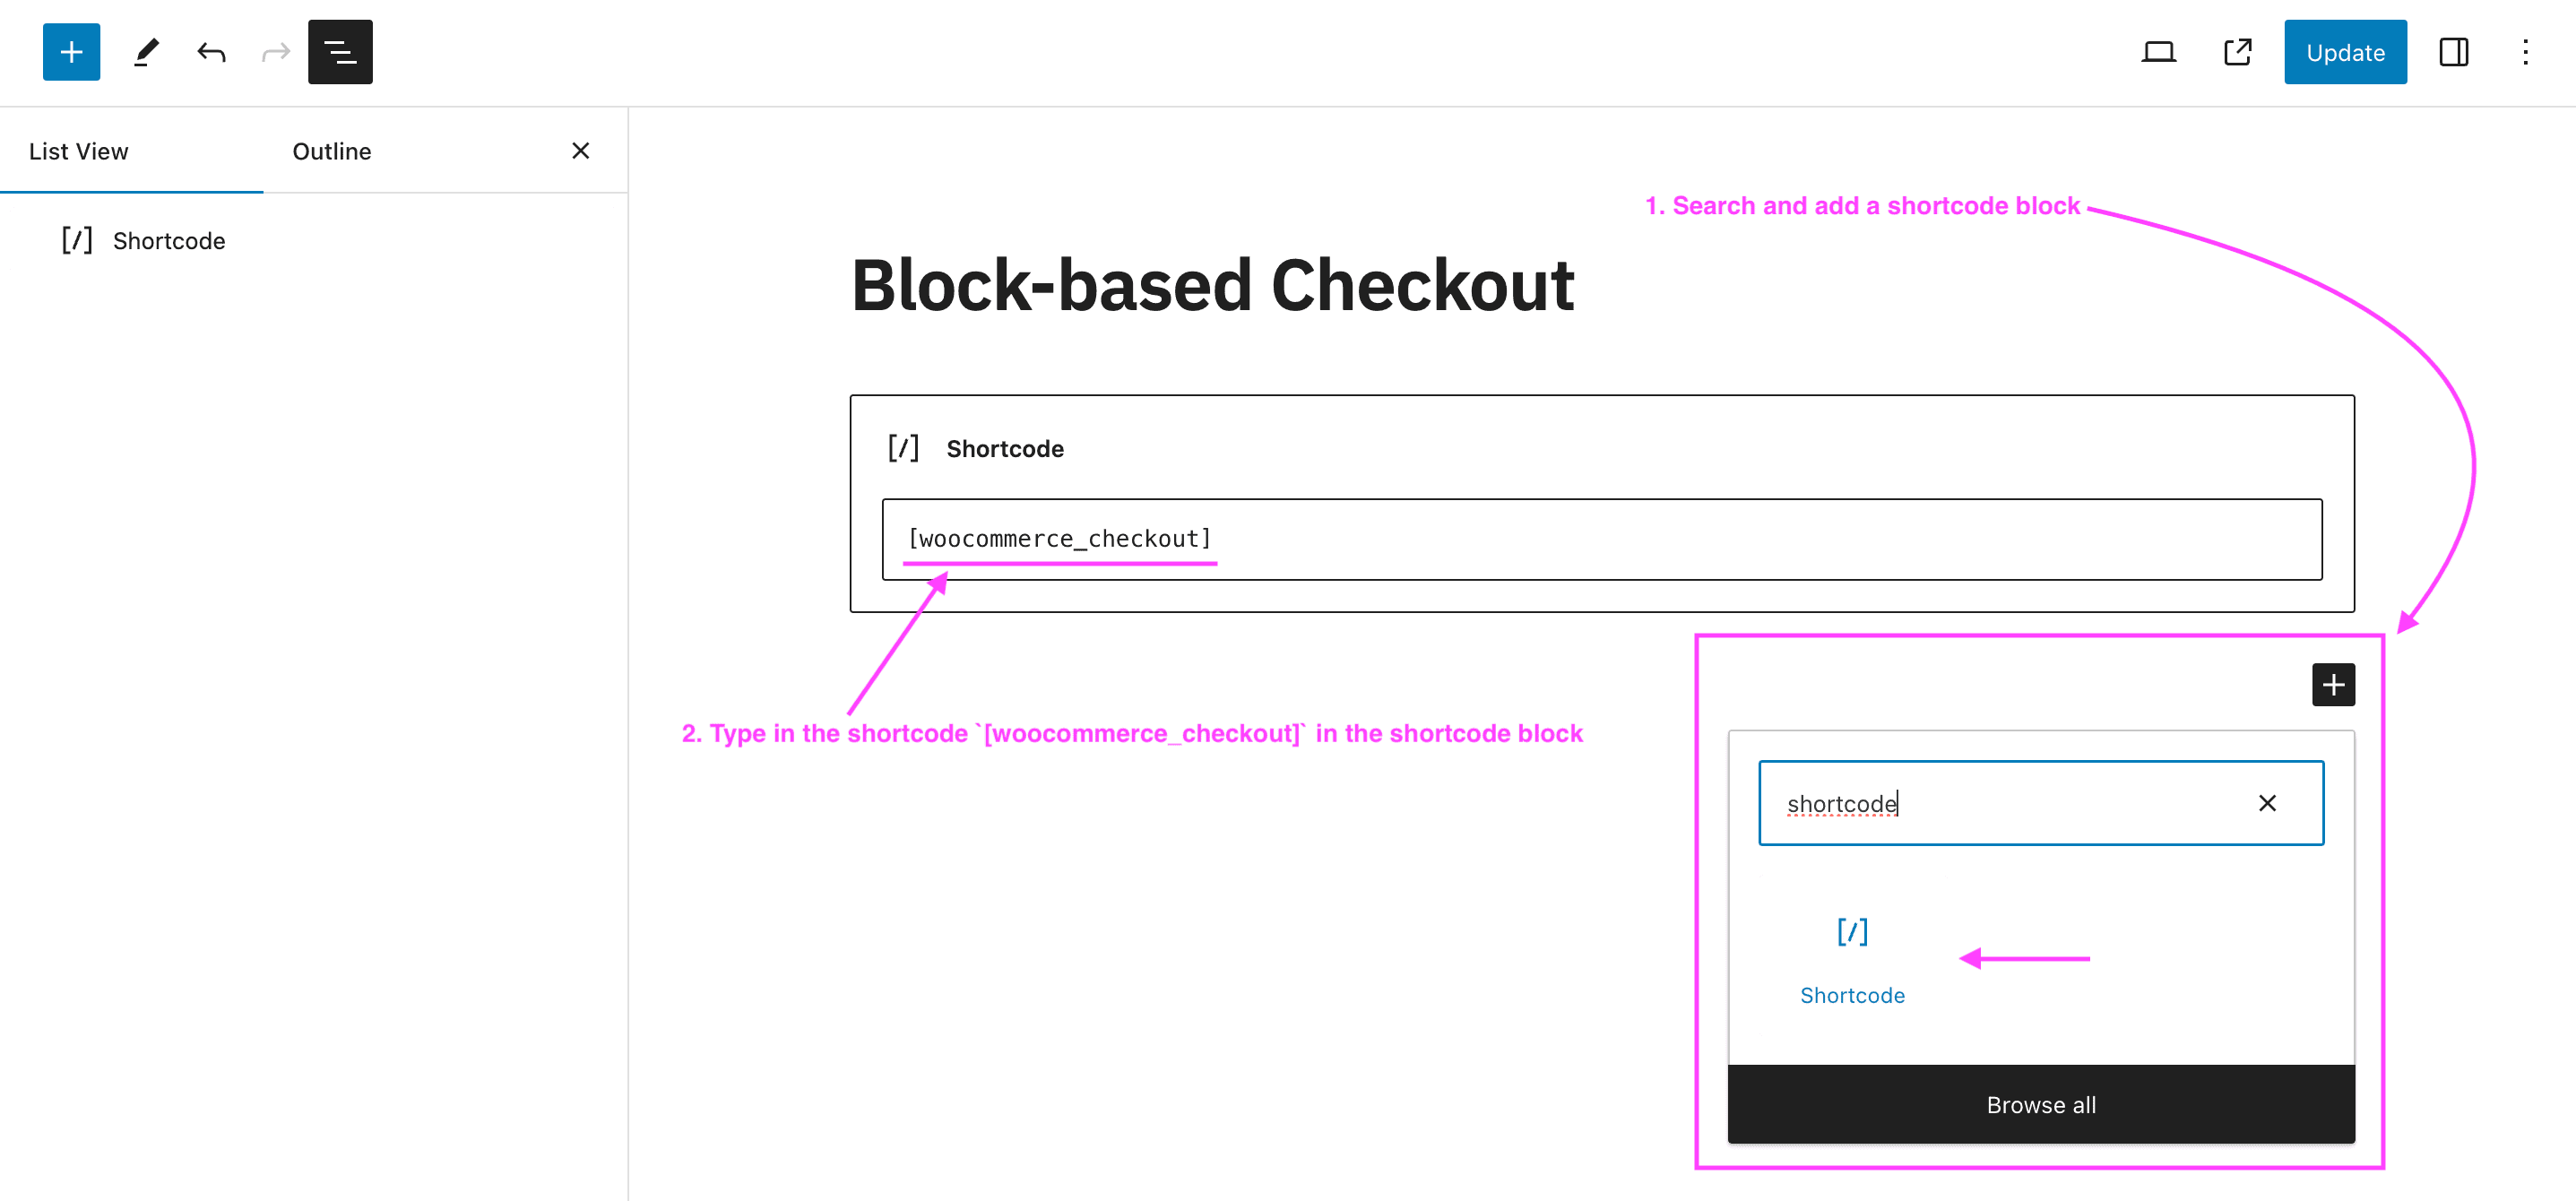 Screenshot of the checkout edit page screen, showing the steps to add the shortcode-based checkout form.